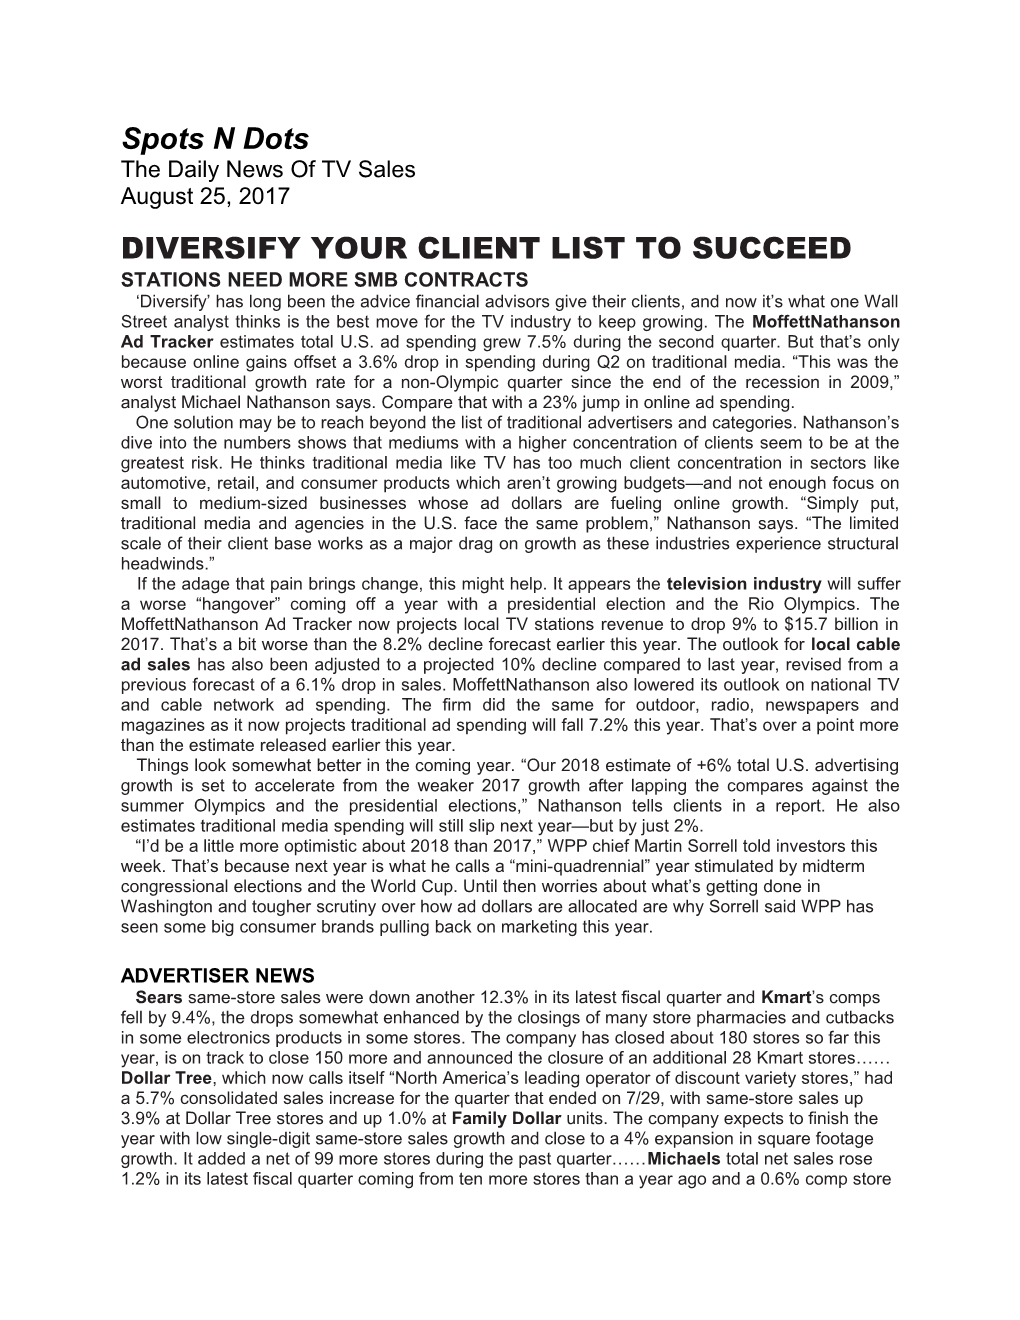 Diversify Your Client List to Succeed